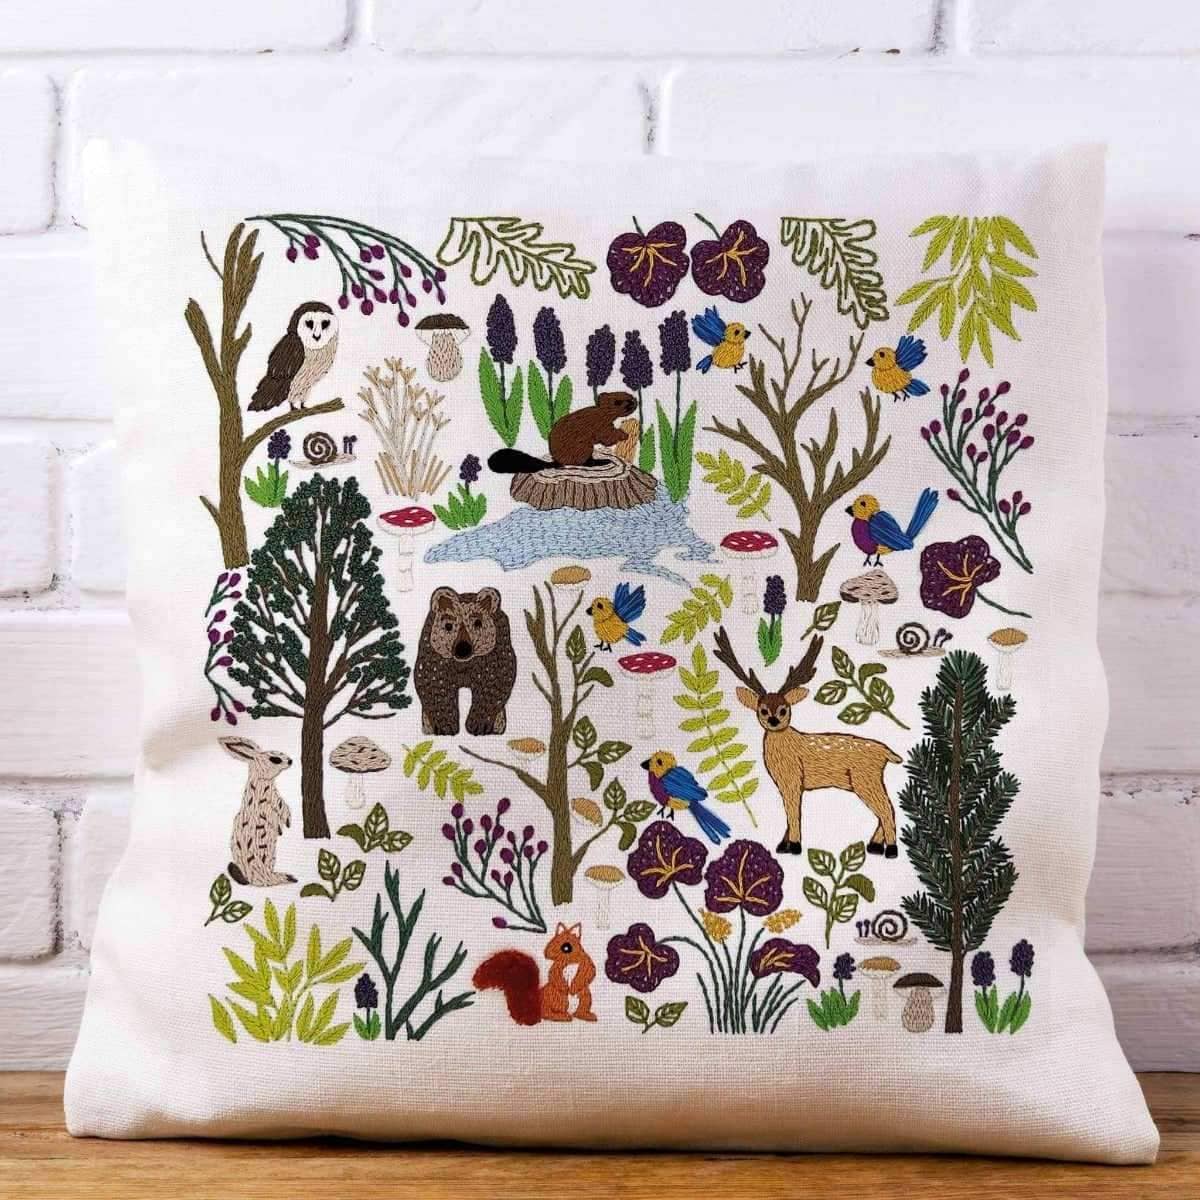 Into the Forest Hand Embroidery Kit, Embroidery Kit, StitchDoodles, A Walk in the Woods - stitchdoodles, bird embroidery, creative, Embroidery, embroidery hoop, Embroidery Kit, embroidery pattern, forest embroidery, hand embroidery, hand embroidery fabric, hand embroidery kit, hand embroidery seat frame, nurge embroidery hoop, nurge square hoops, pattern, patterns, Printed Pattern, StitchDoodles, stitched, stitching, wildlife embroidery, StitchDoodles, shop.stitchdoodles.com